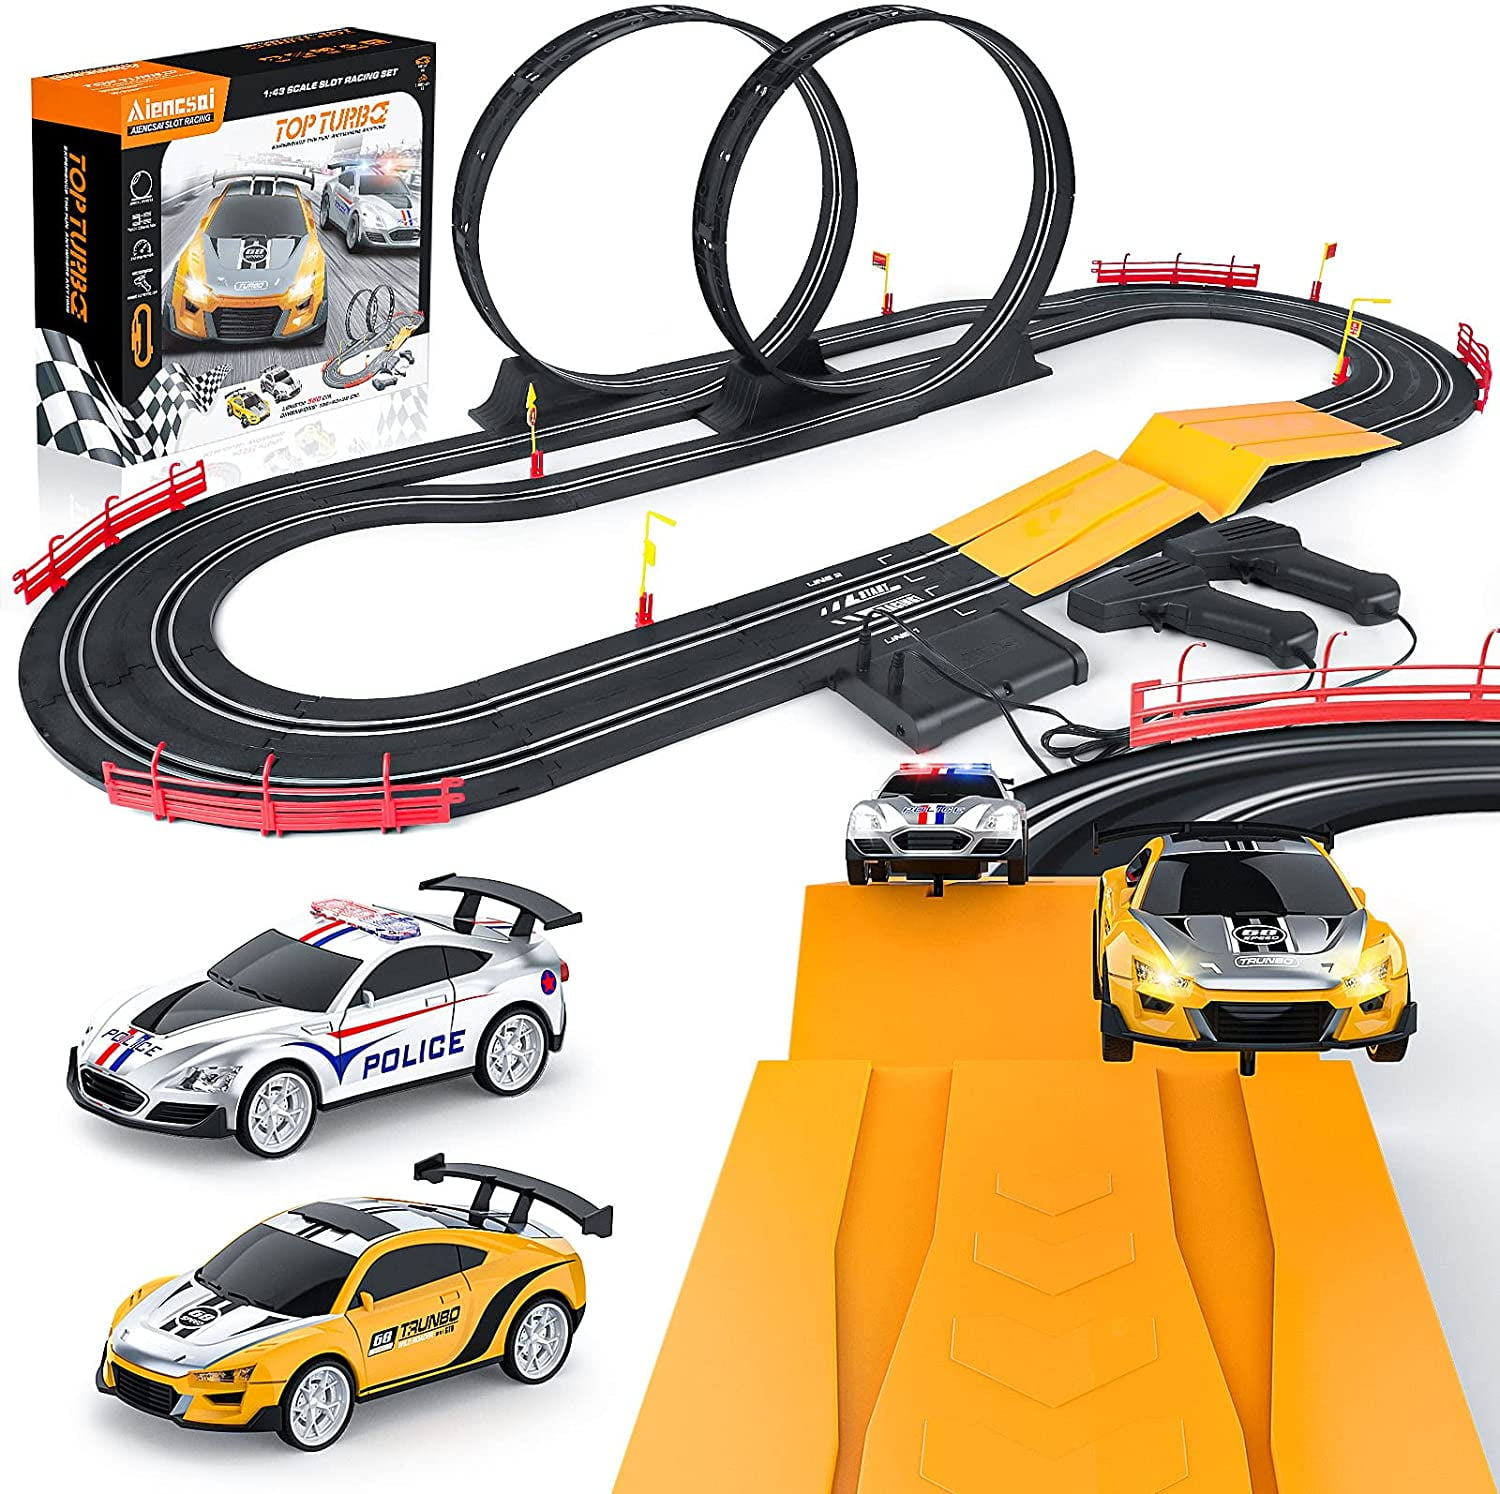 Master Class Electric Powered Slot Car Racing Kids Toy Race Track Set for Boys 3 4 5 6 7 8-16 Years Old Boys Girls Best Gifts 